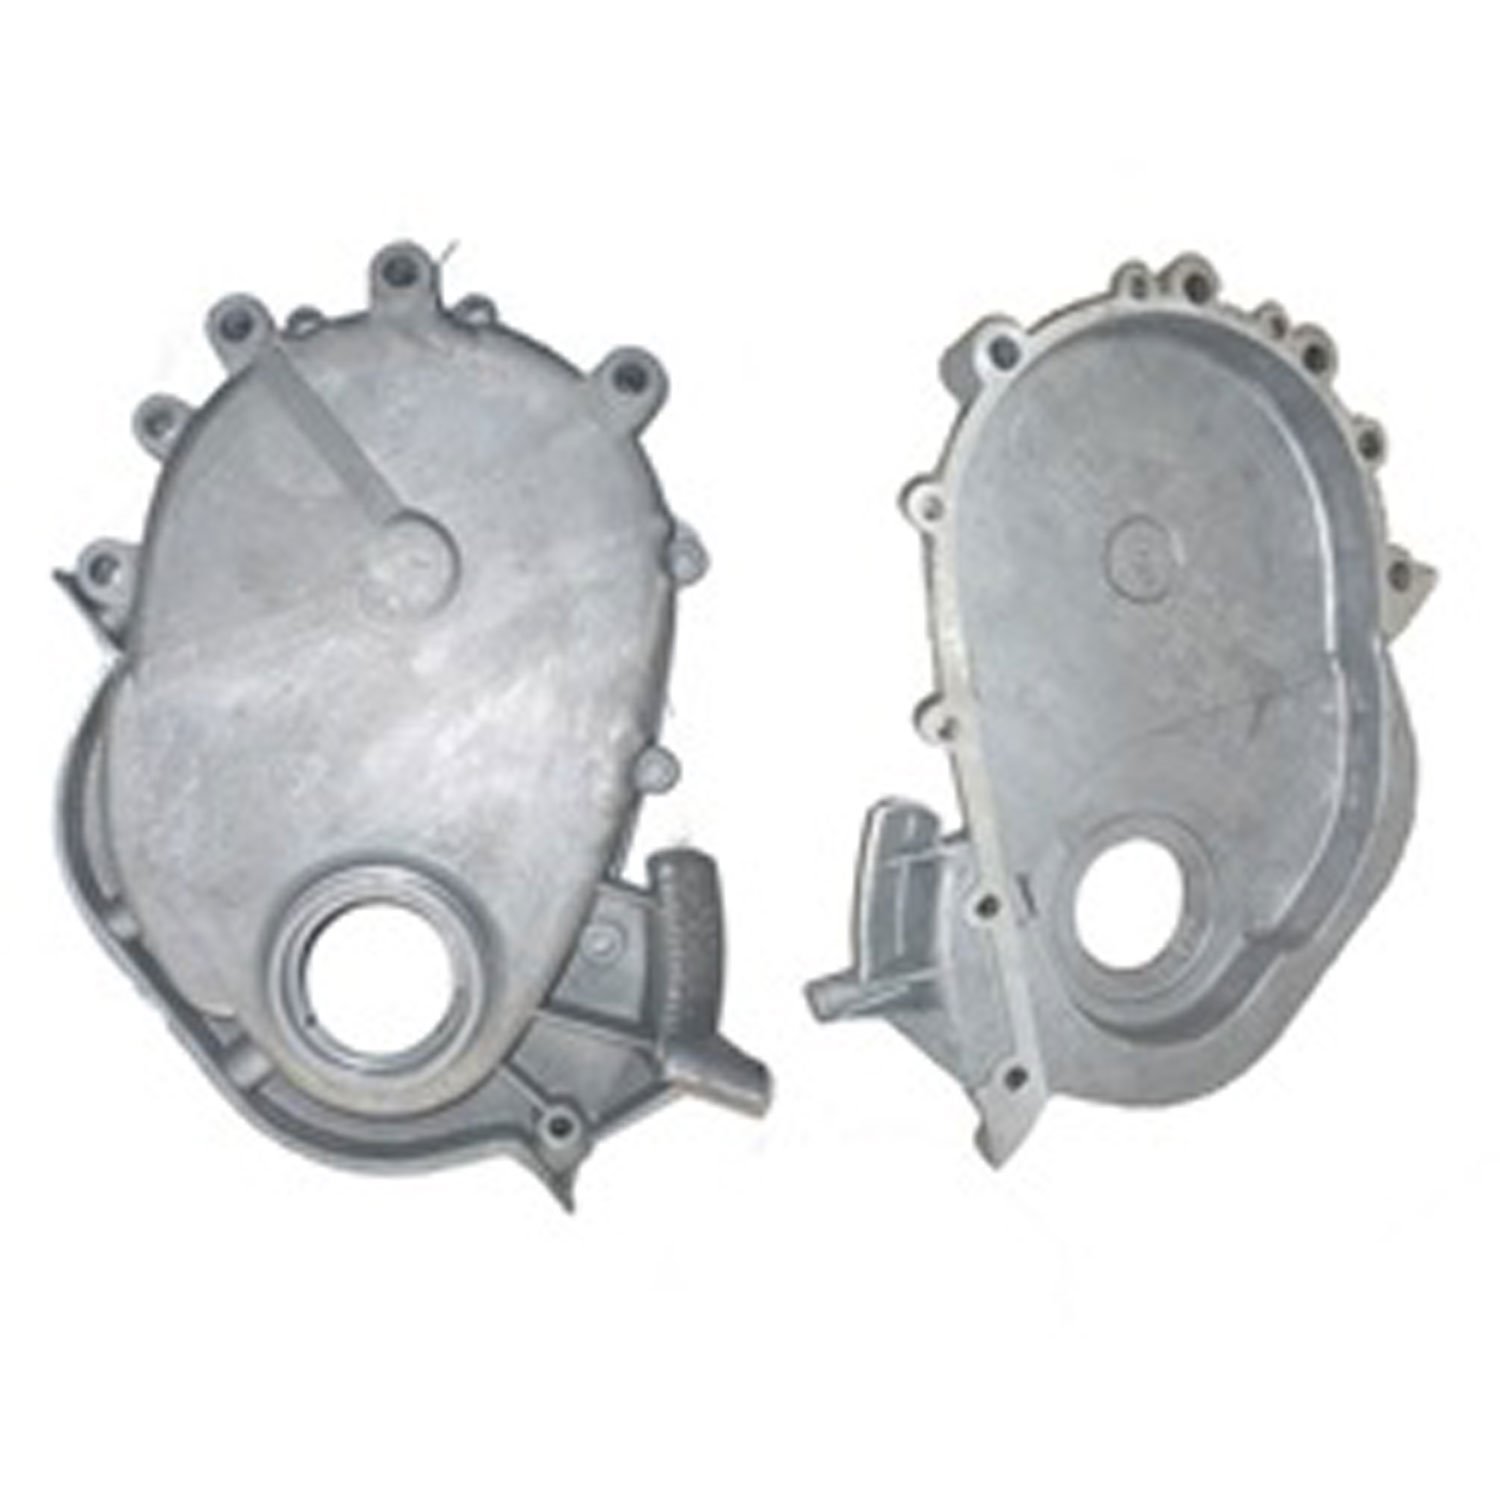 This timing chain cover from Omix-ADA fits 72-93 Jeeps with 2.5 3.8 4.0 and 4.2 liter engines. Does